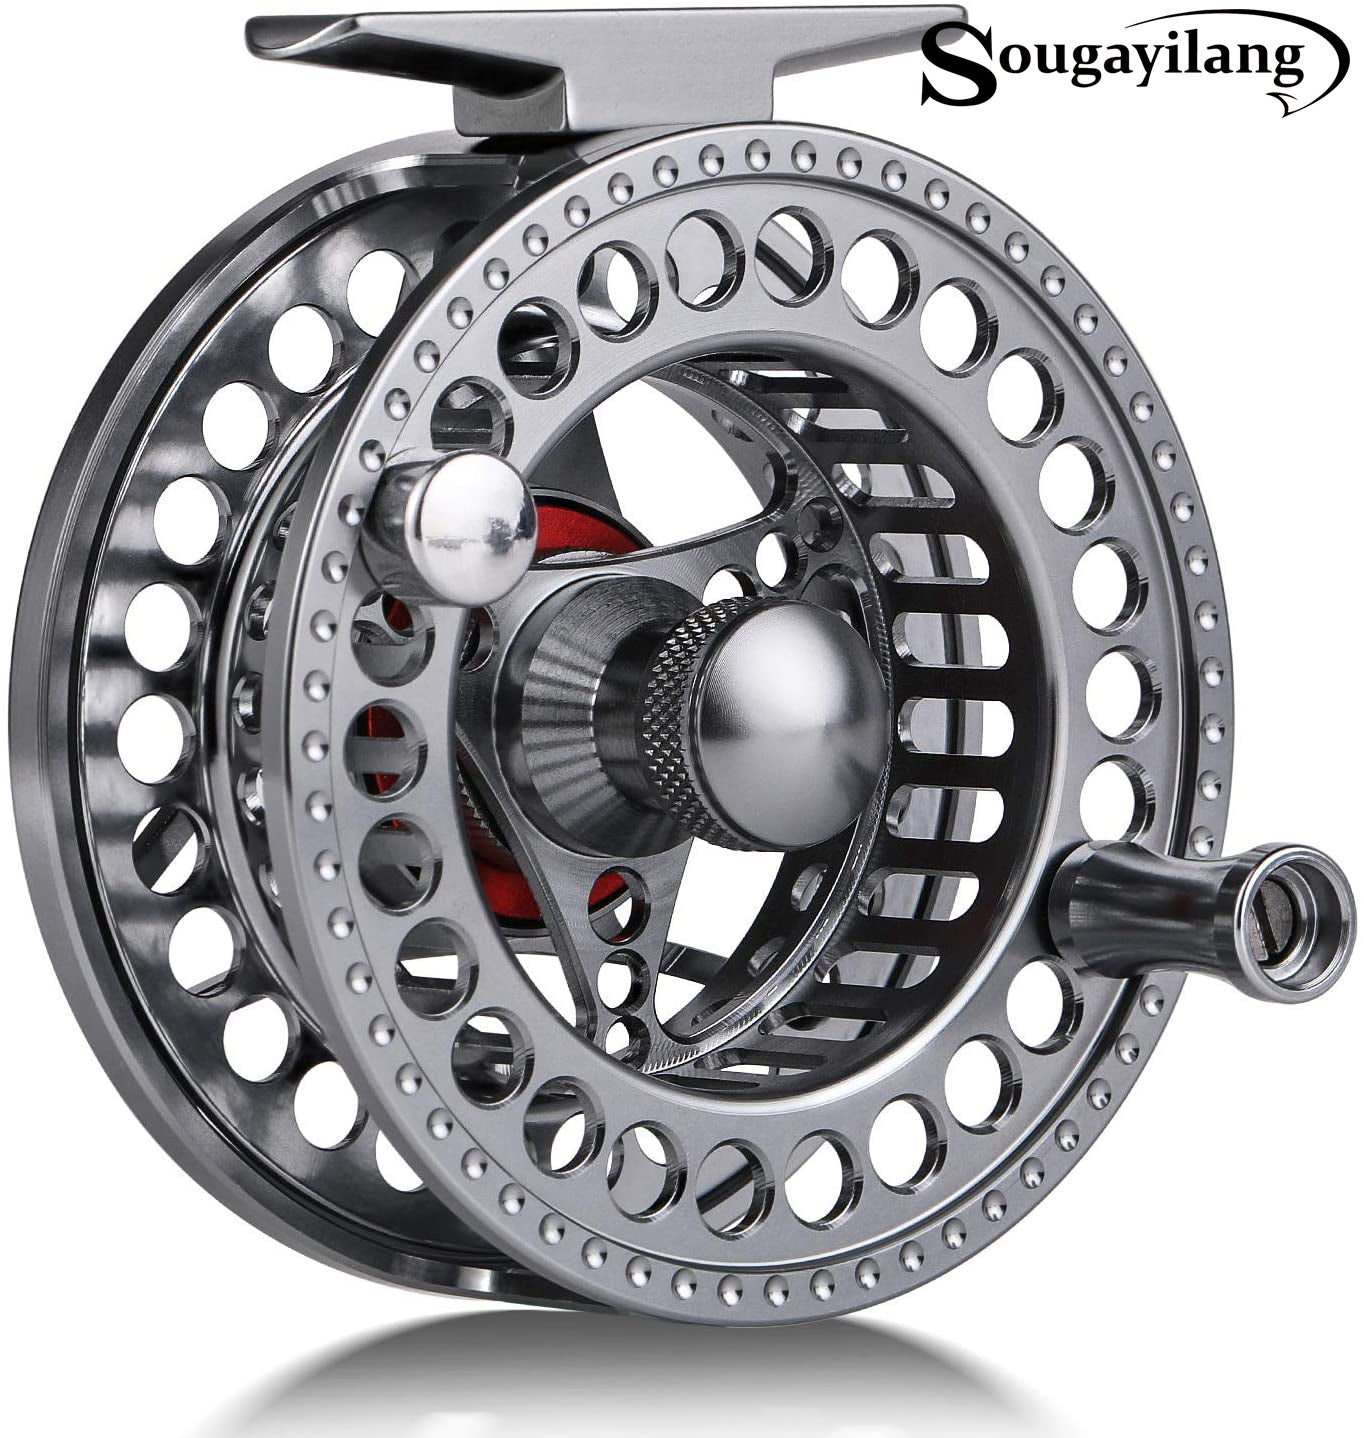 2+1BB Large Arbor Fly Fishing Reel Lightweight CNC Machined Aluminum Alloy  Fly Fishing Reel with Line